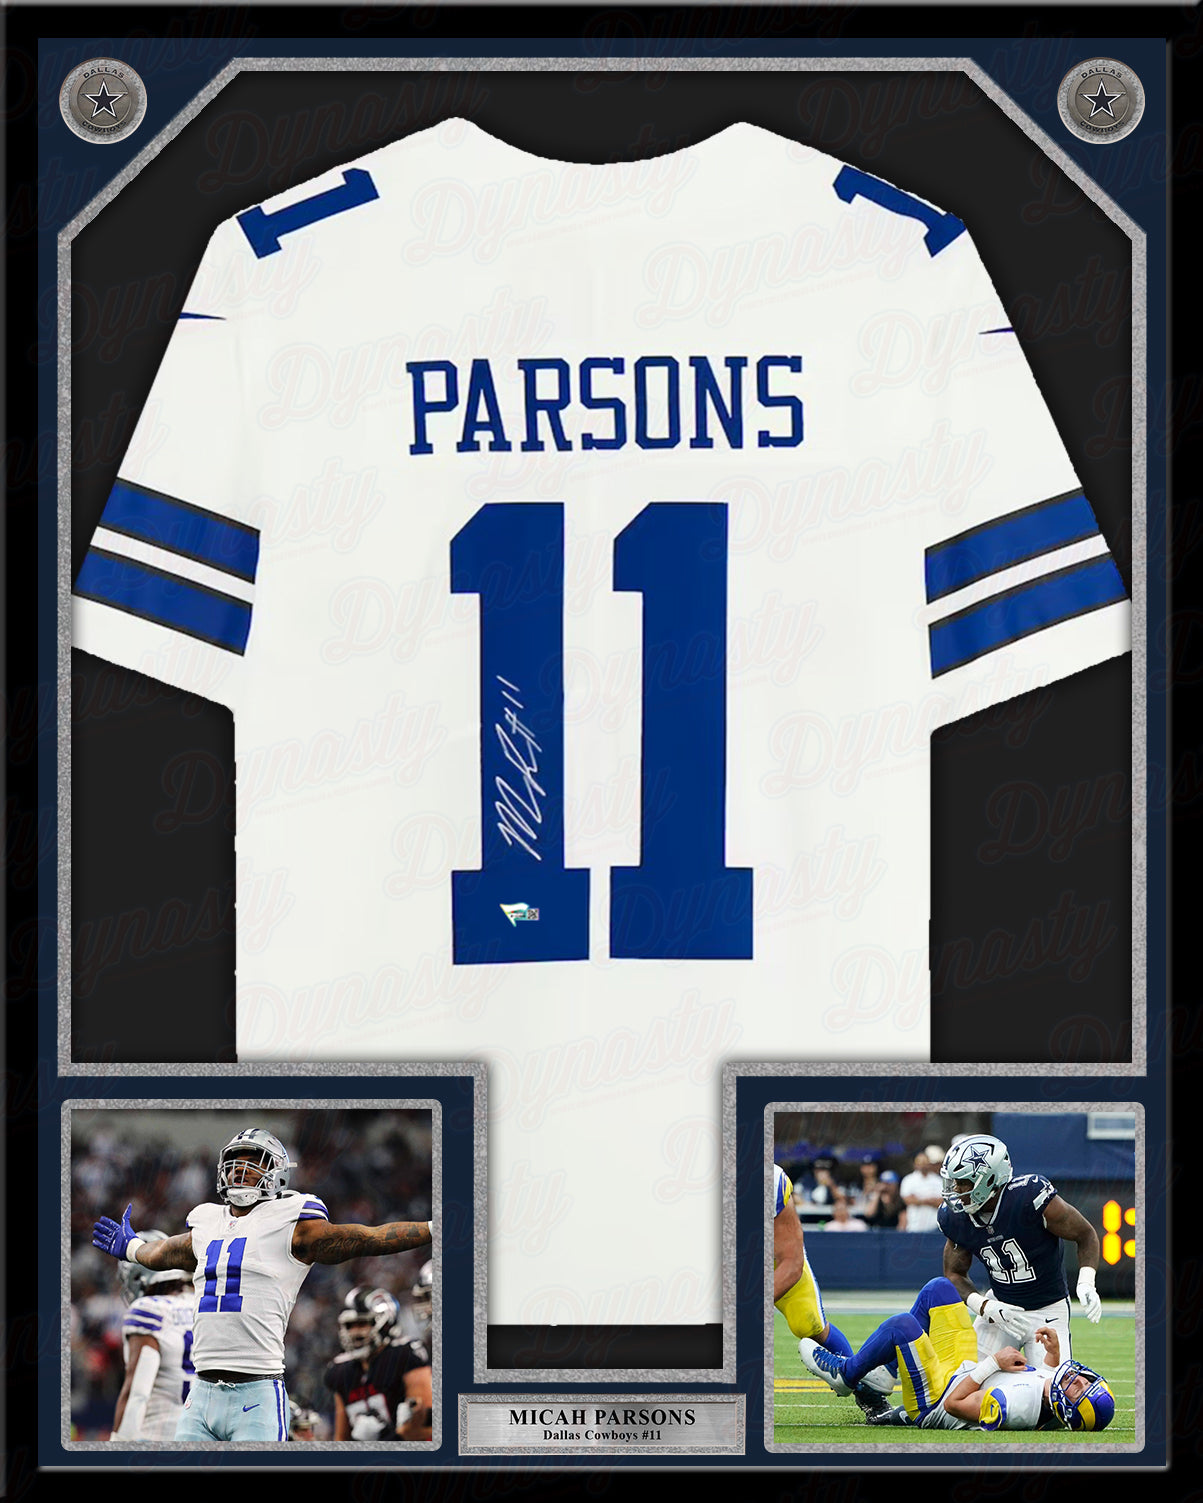 make your own cowboys jersey